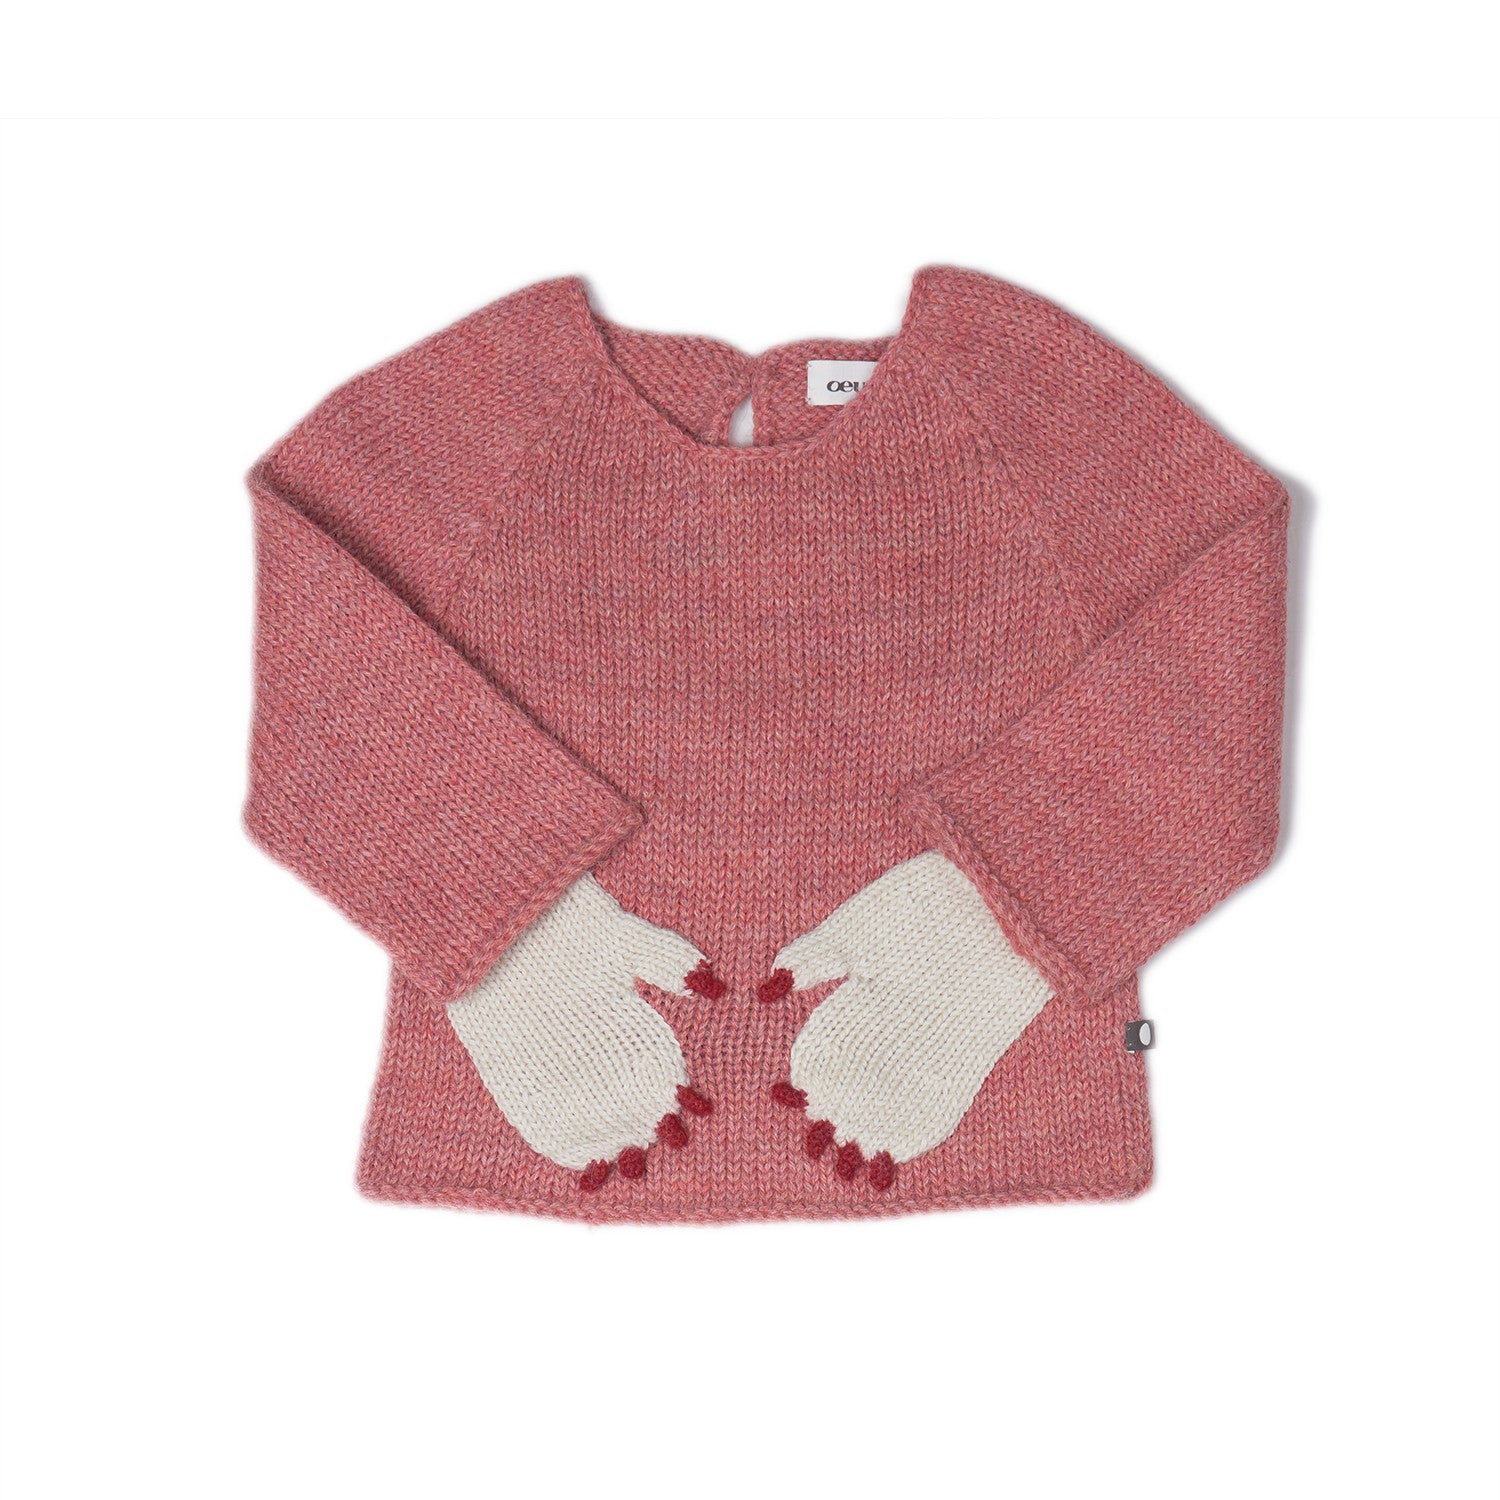 Baby Pink Monster Sweater With Gloves - CÉMAROSE | Children's Fashion Store